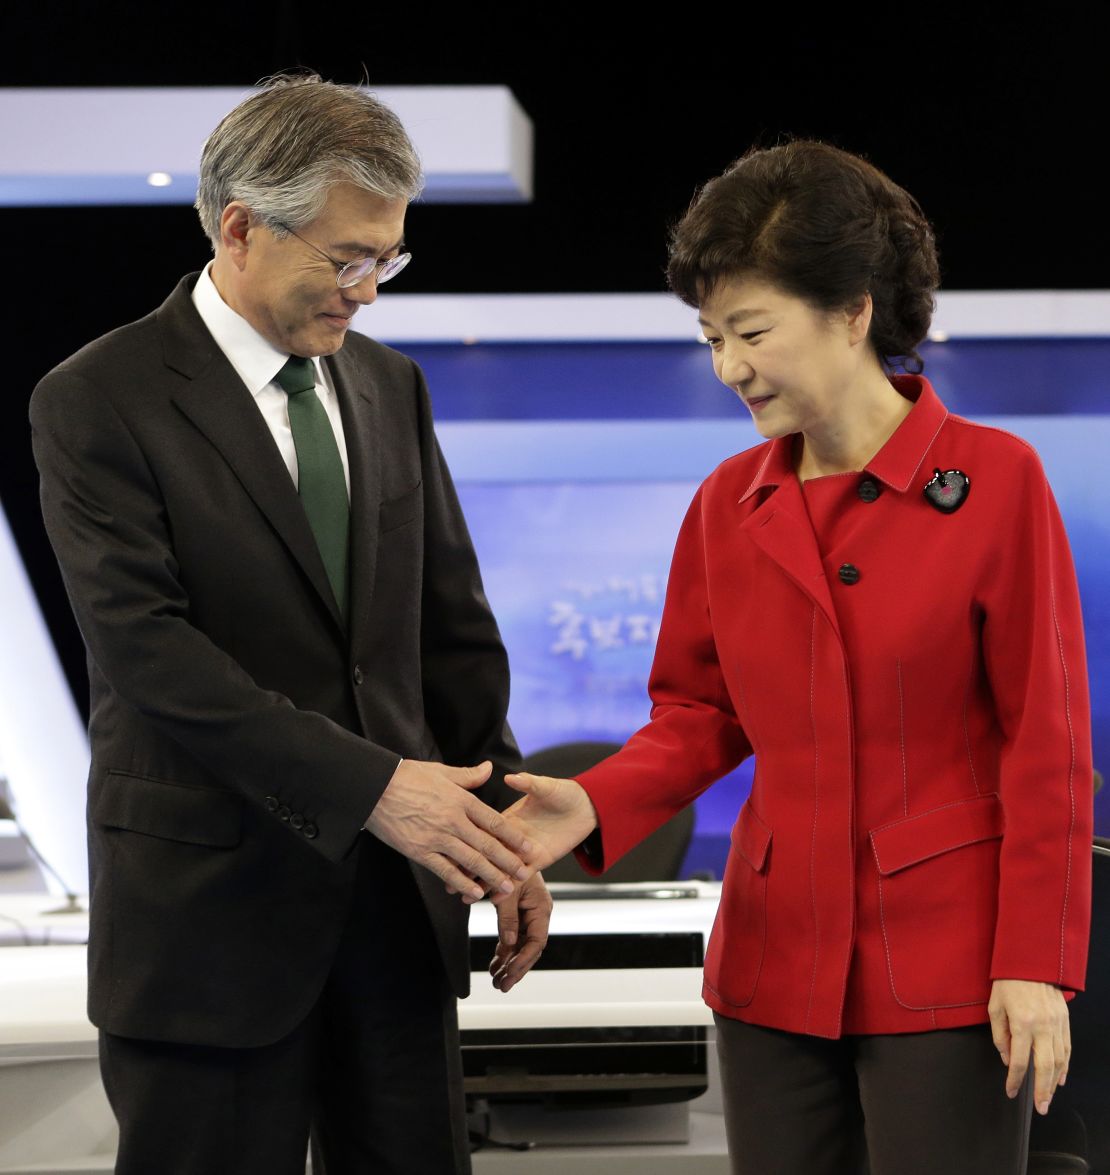 Either Moon Jae-in or Park Geun-hye will be elected as South Korea's next president Wednesday.